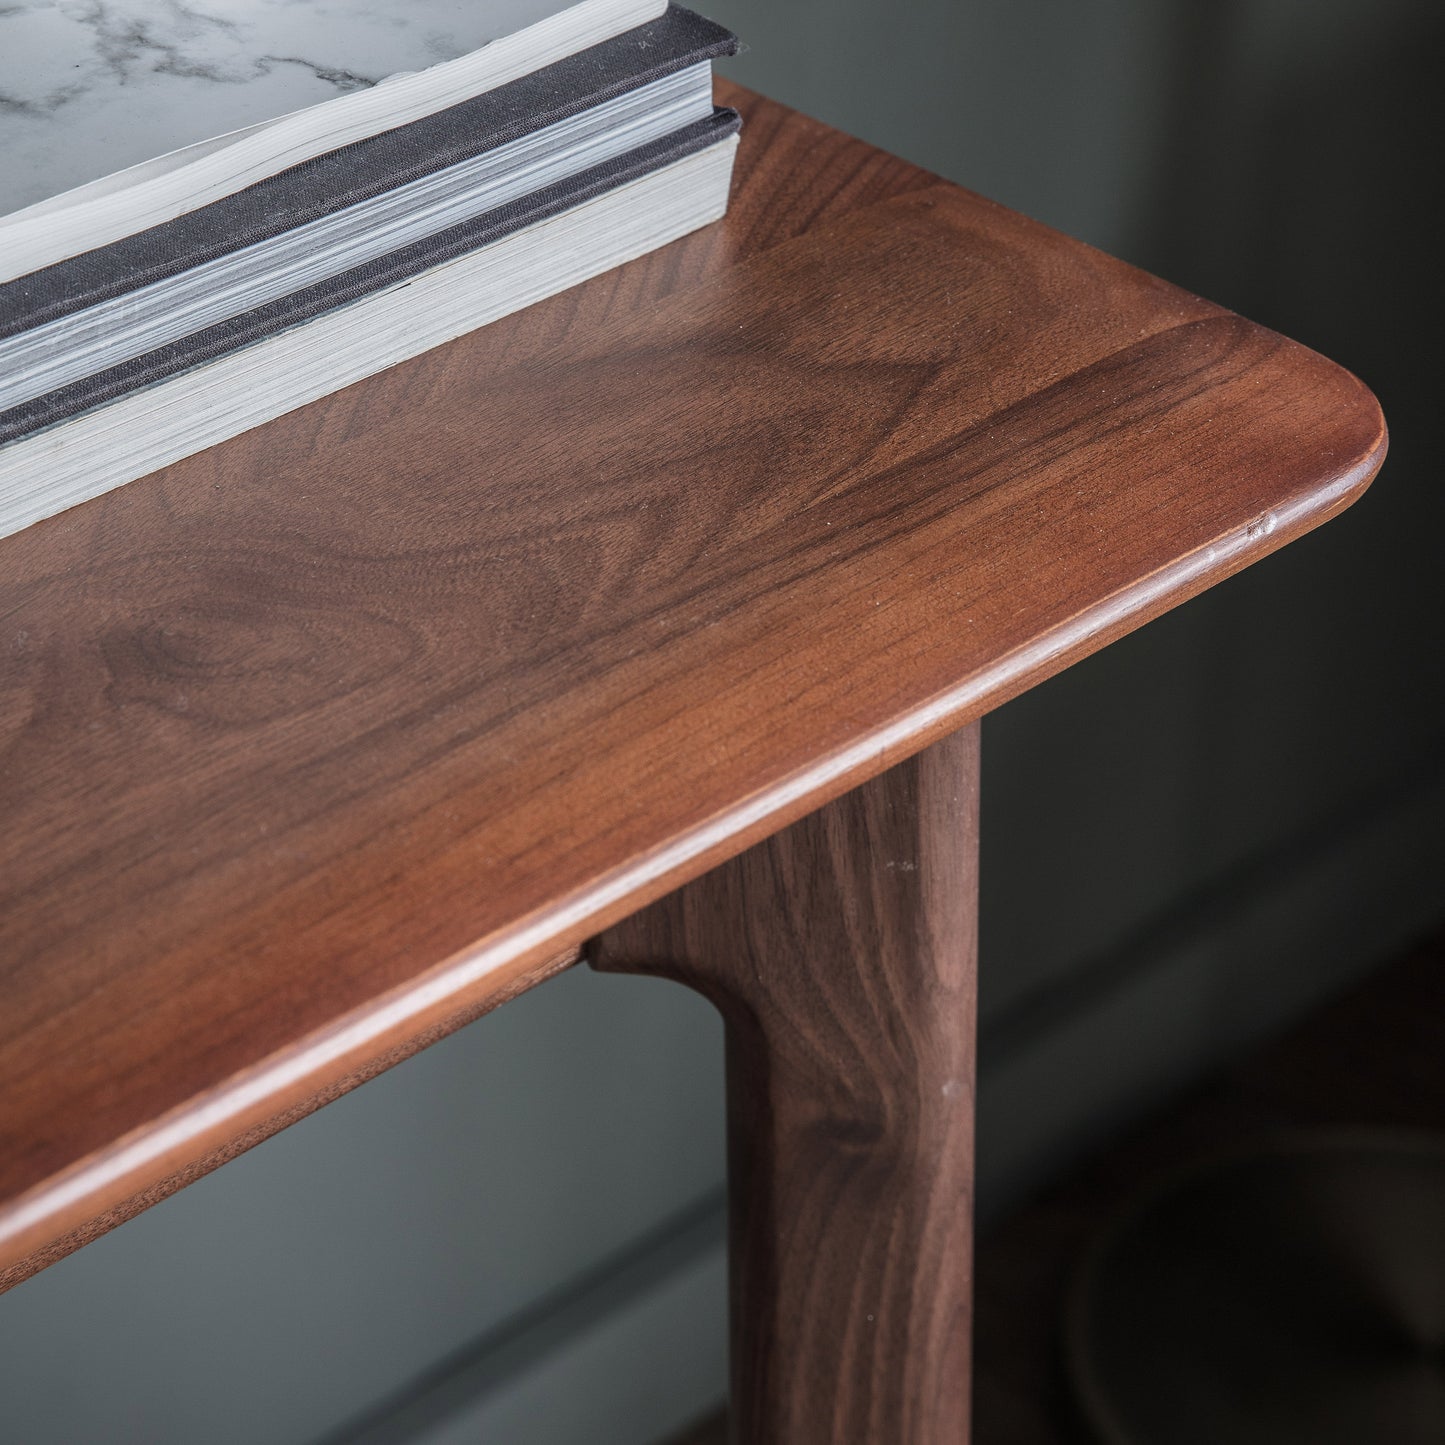 A Walnut home furniture piece, the Dairy 1 Drawer Desk by Kikiathome.co.uk, adorned with a book for interior decor.